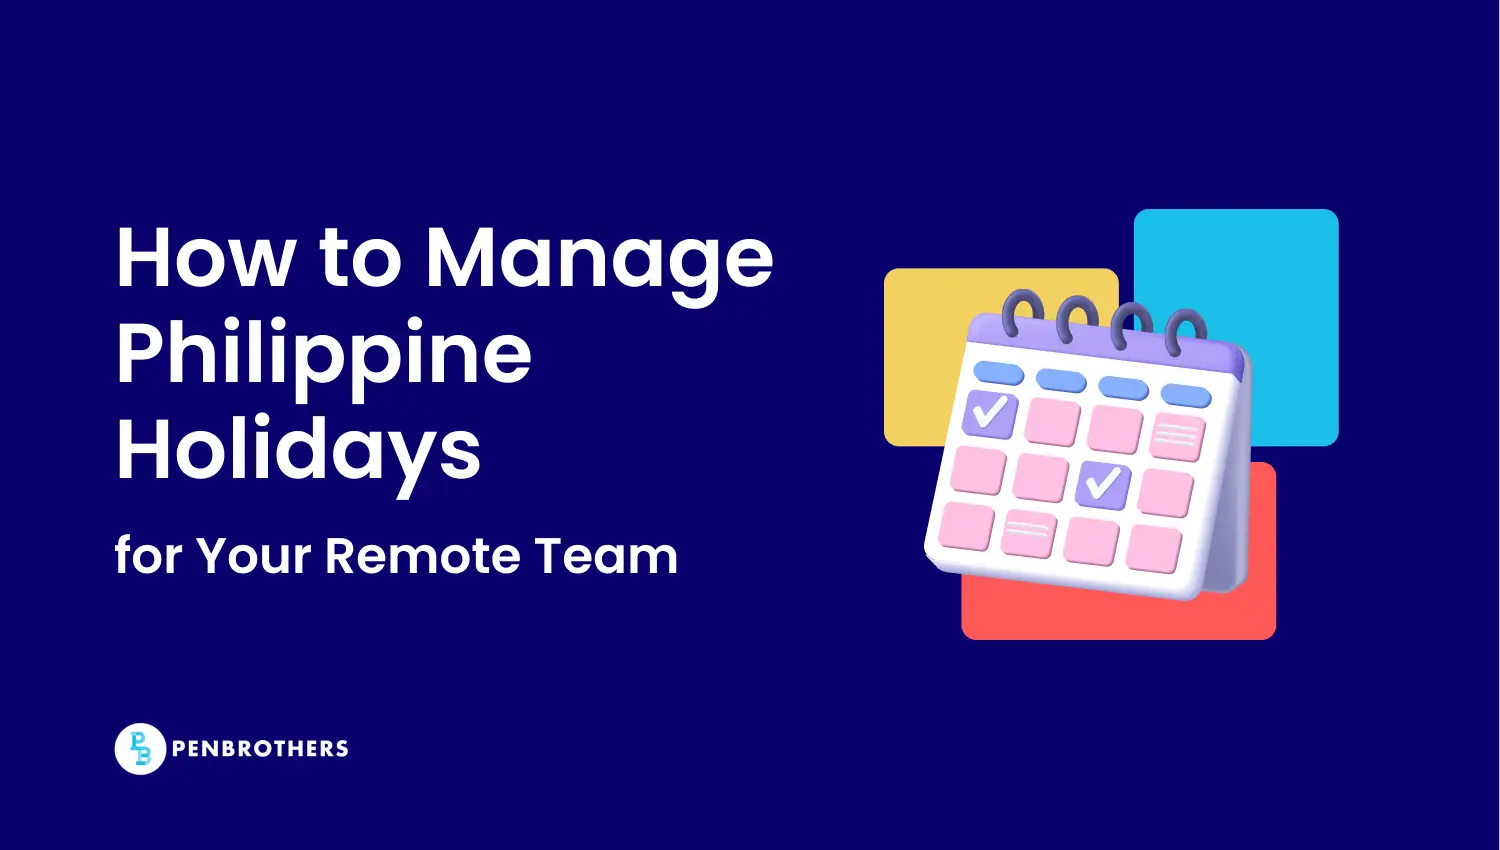 How to Manage Philippine Holidays for Your Remote Team